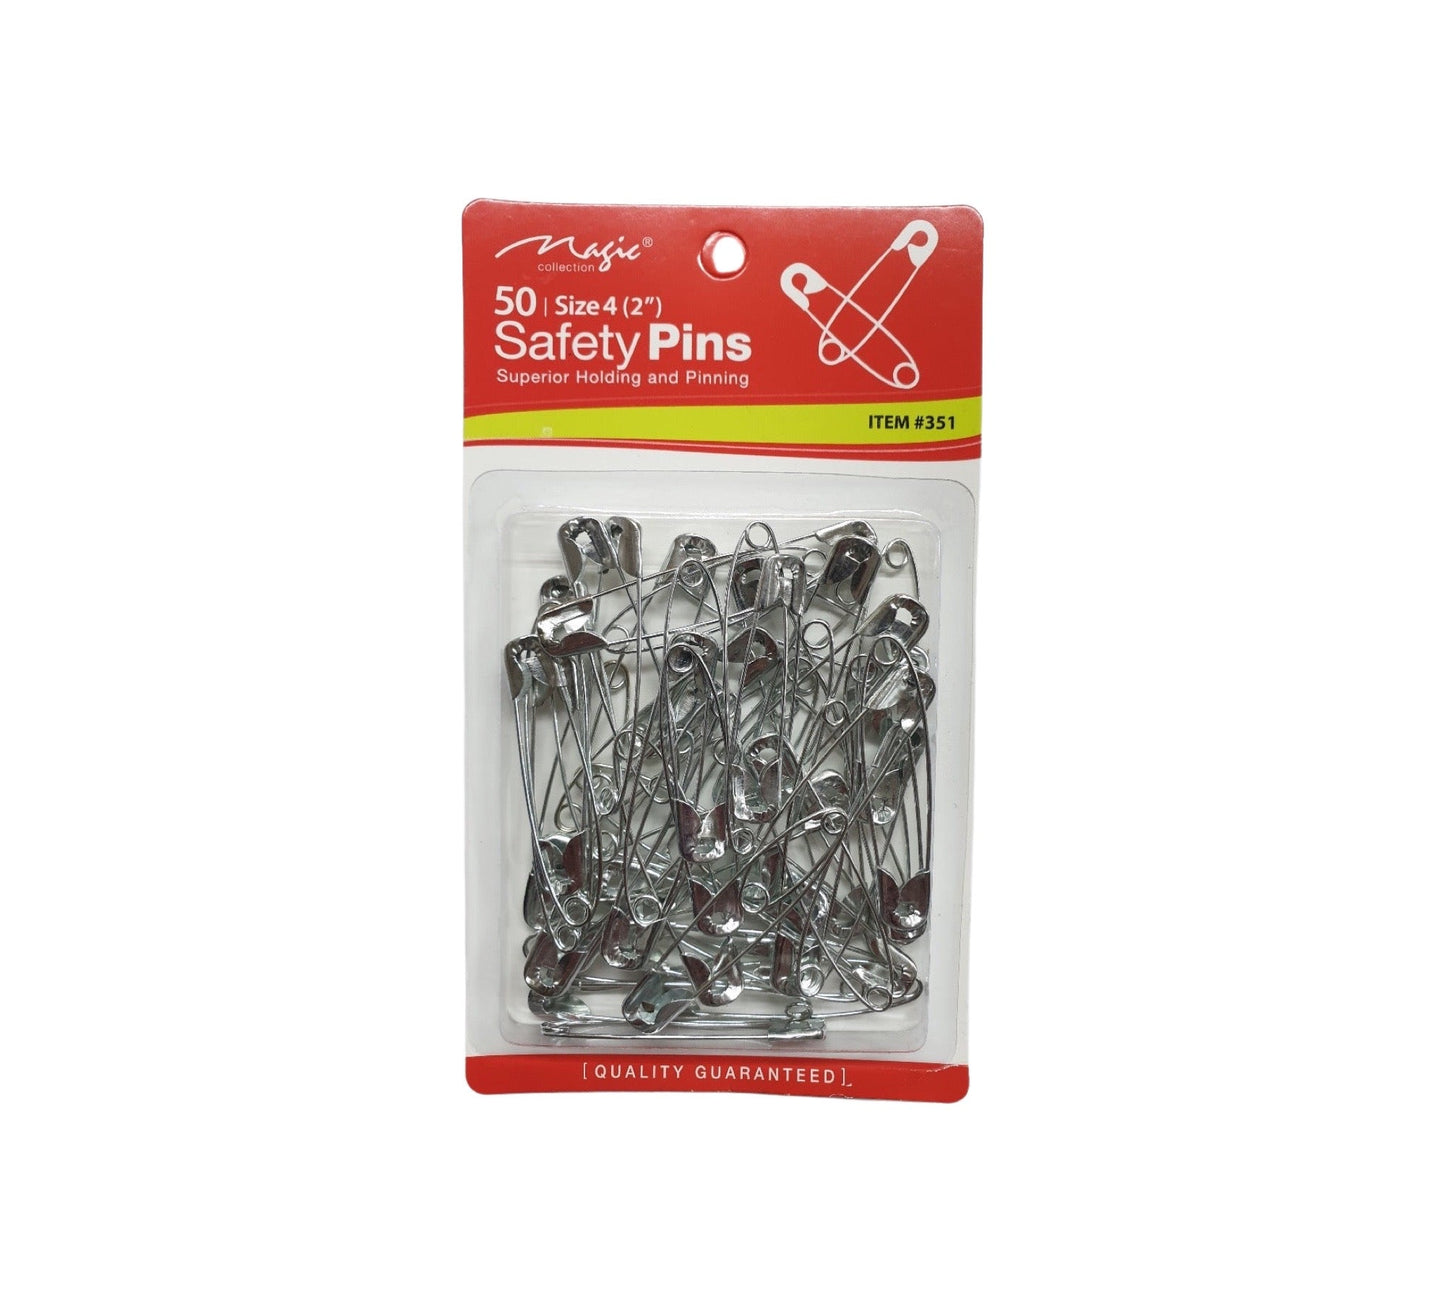 Magic Collection 50 Size 4 (2") Safety Pins - Item #351